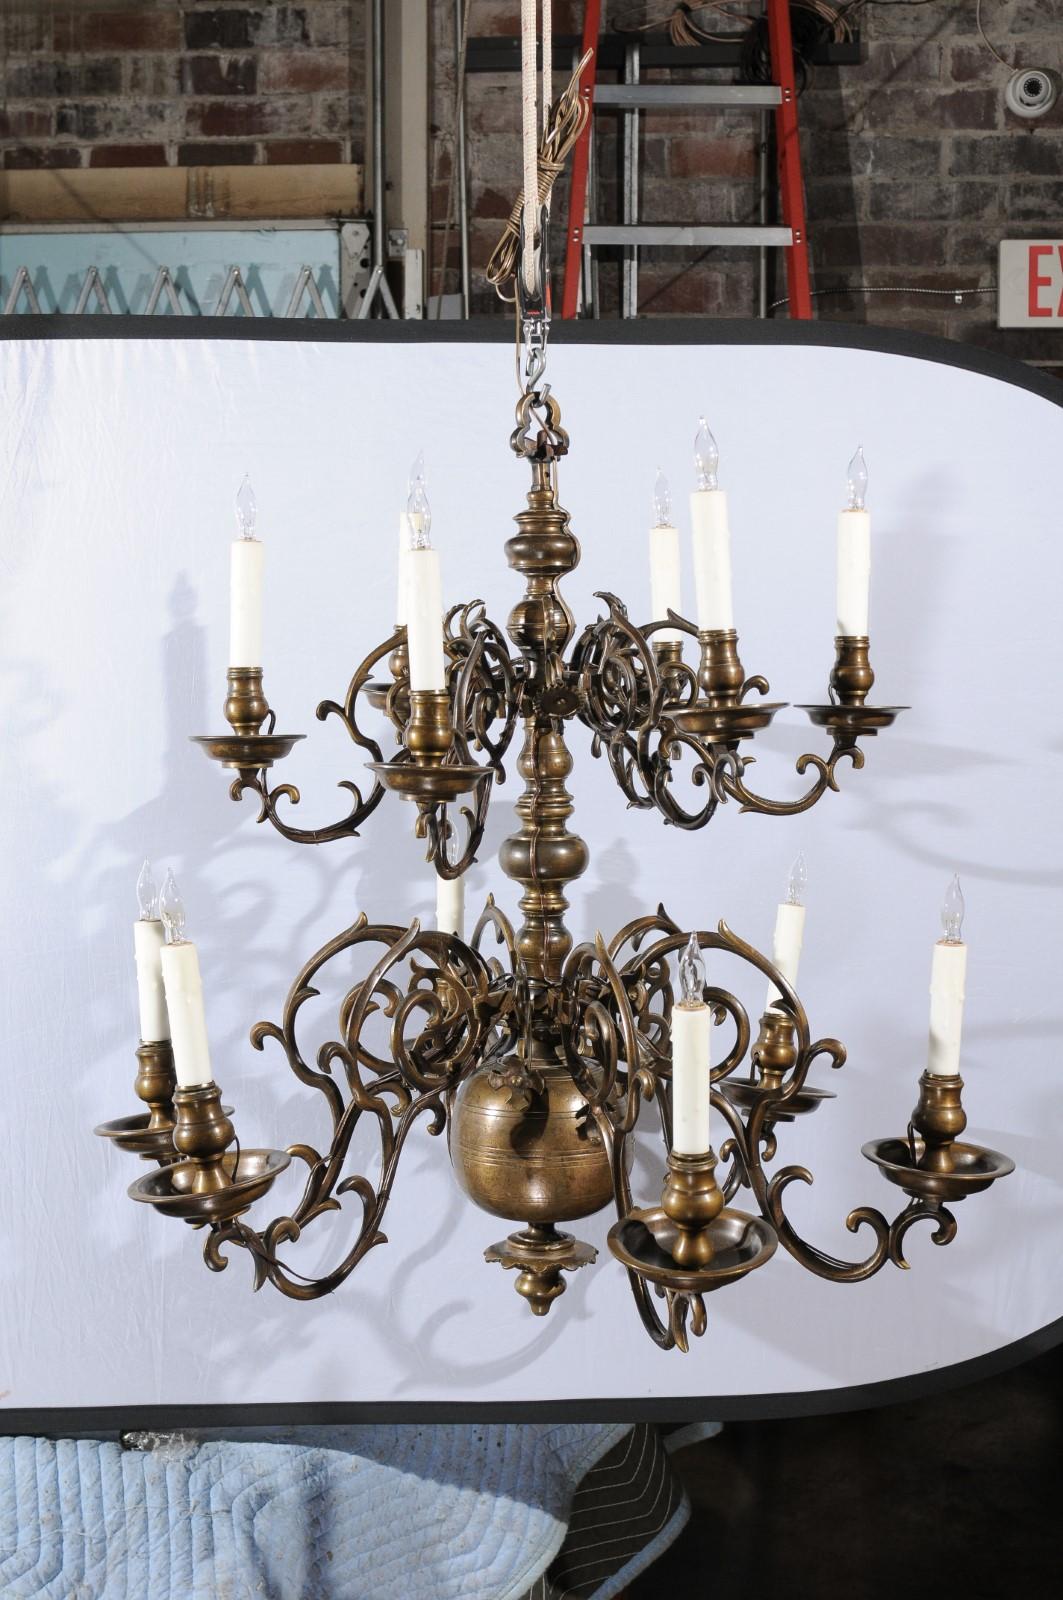 Large 2-Tier Dutch Brass Chandelier with 12 Lights, 18th Century For Sale 10